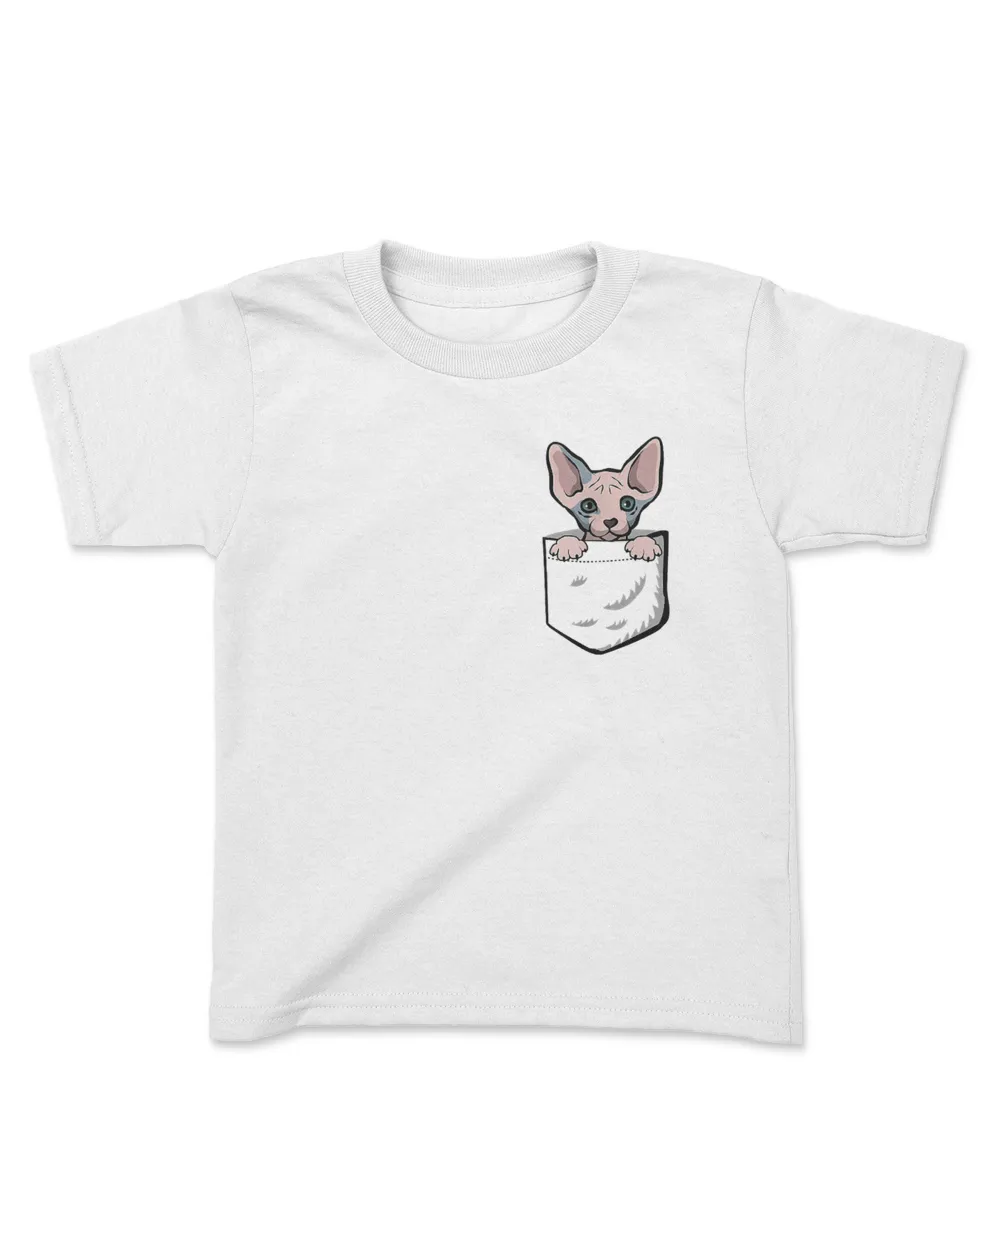 Adorable Little Sphynx Cat In The Pocket T-Shirt